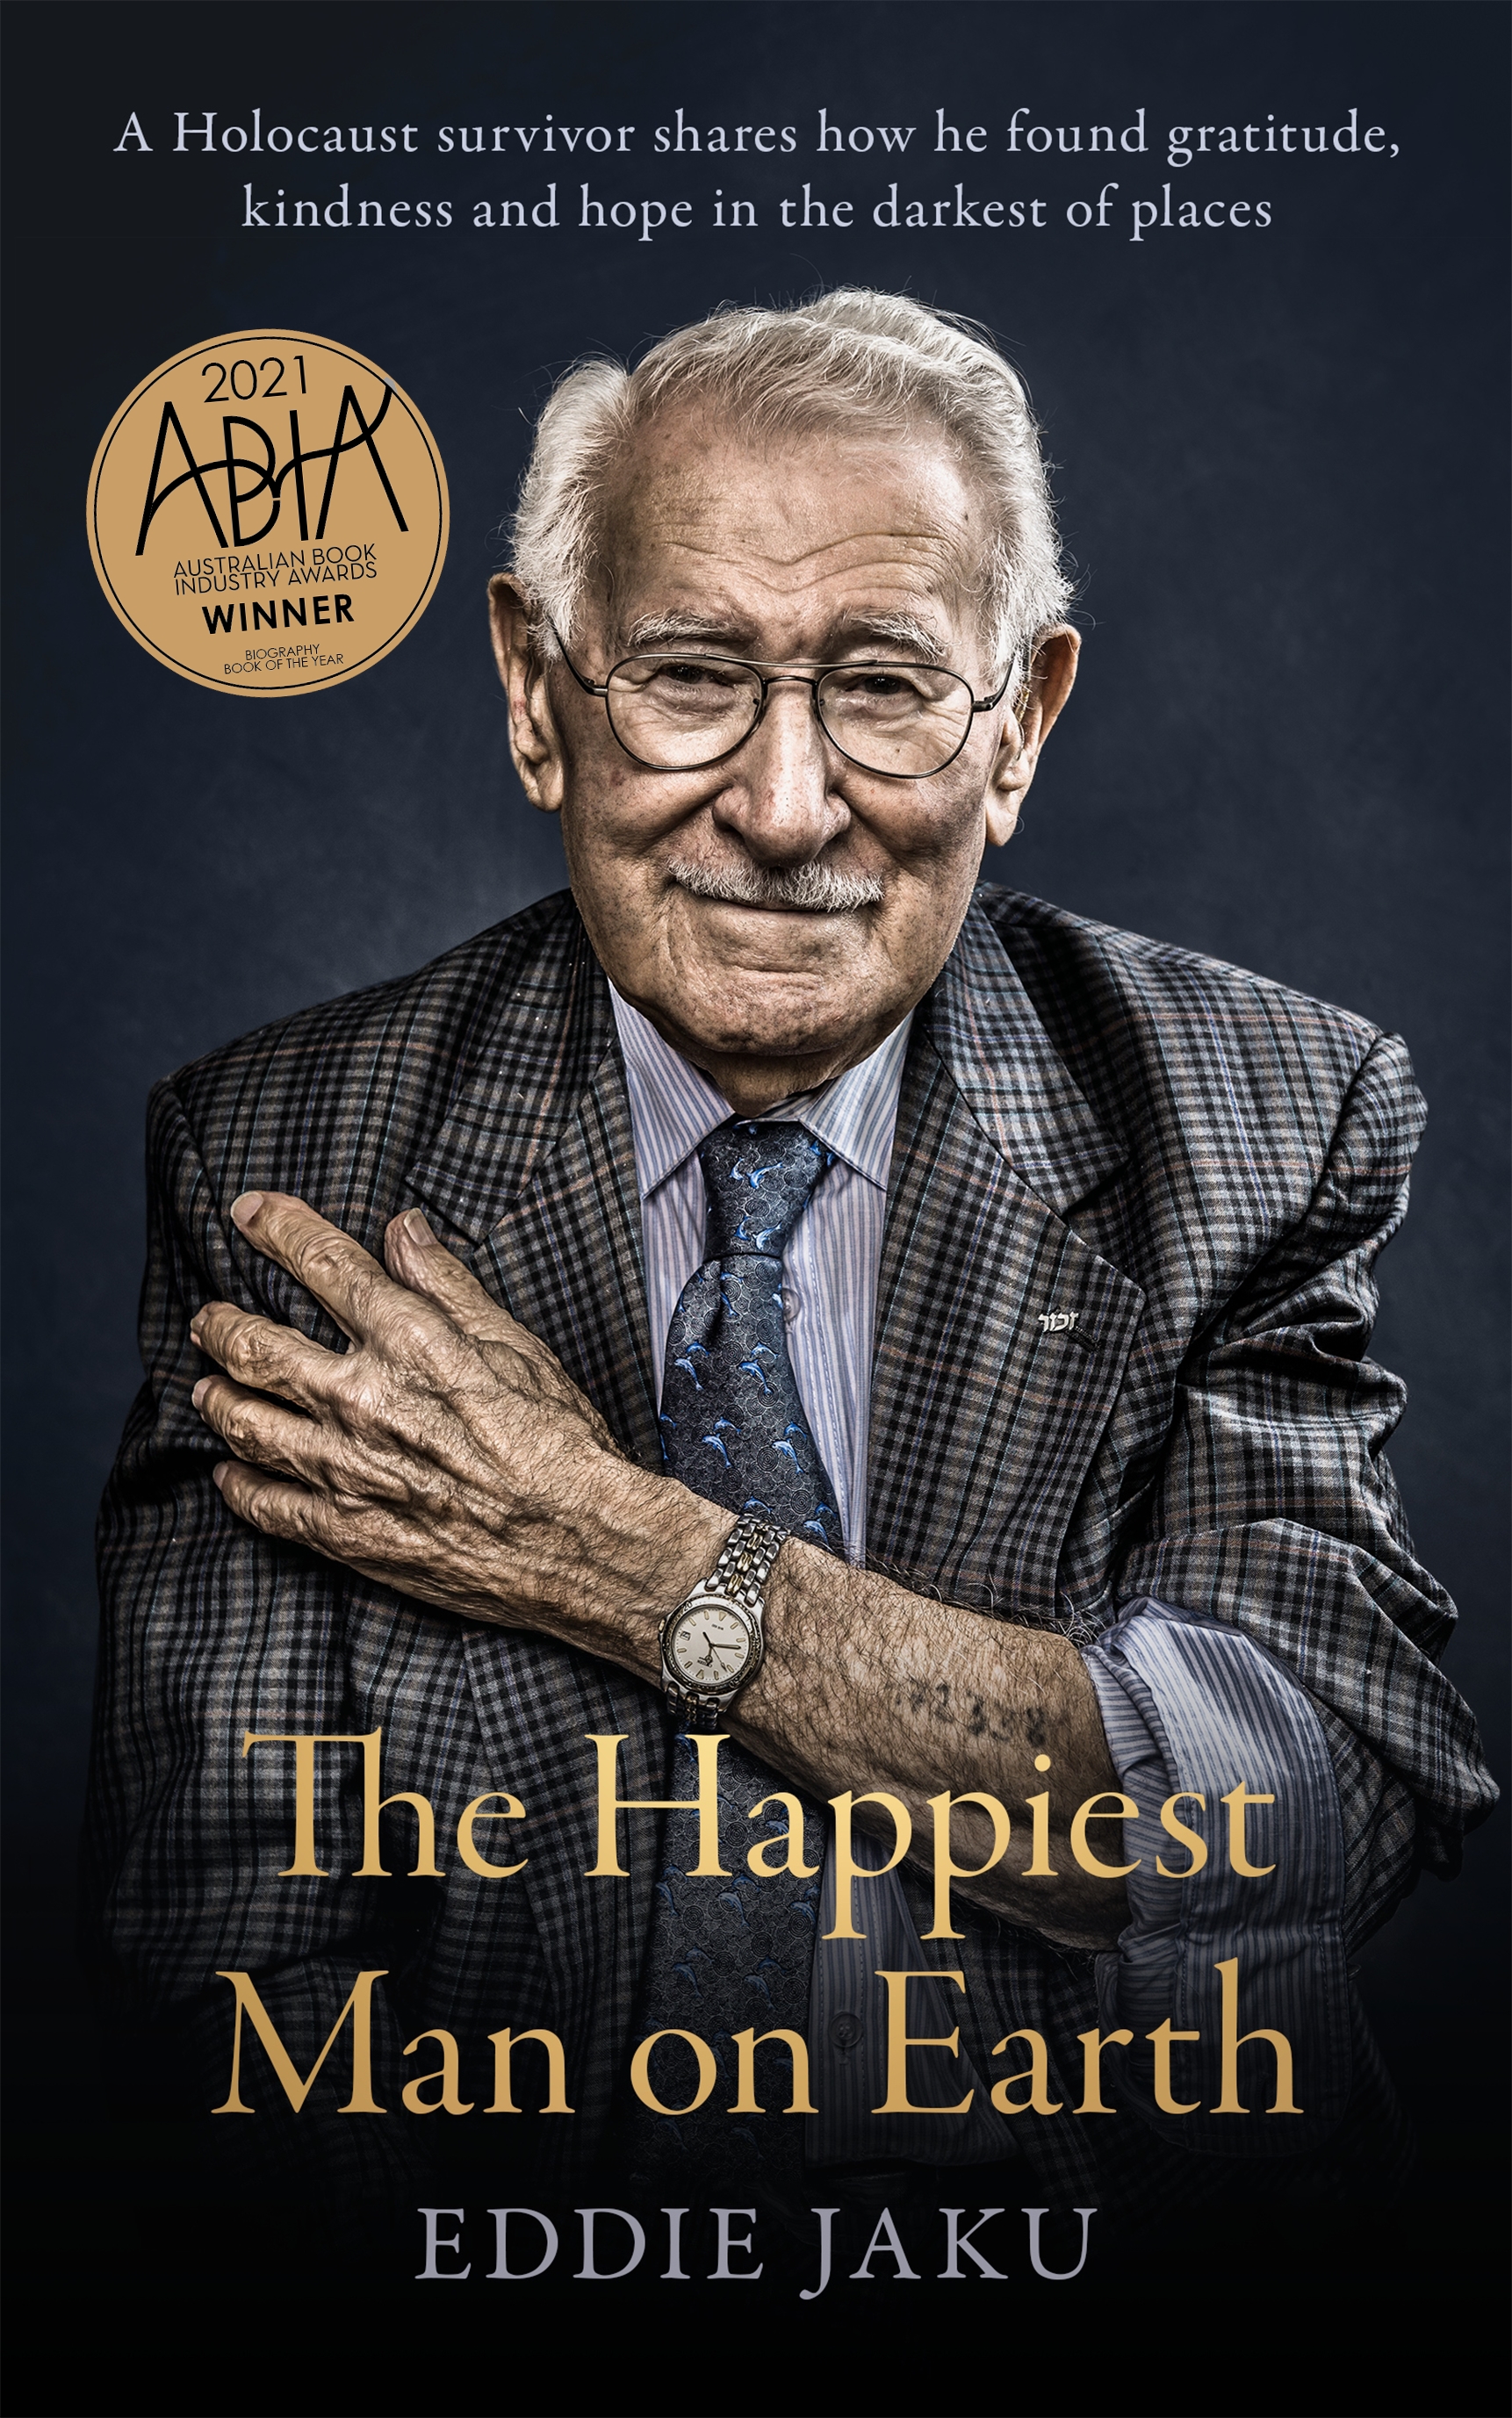 A book cover: an old man with silver hair, glasses and a wry smile wears a suit, one sleeve pushed up showing a tattooed number